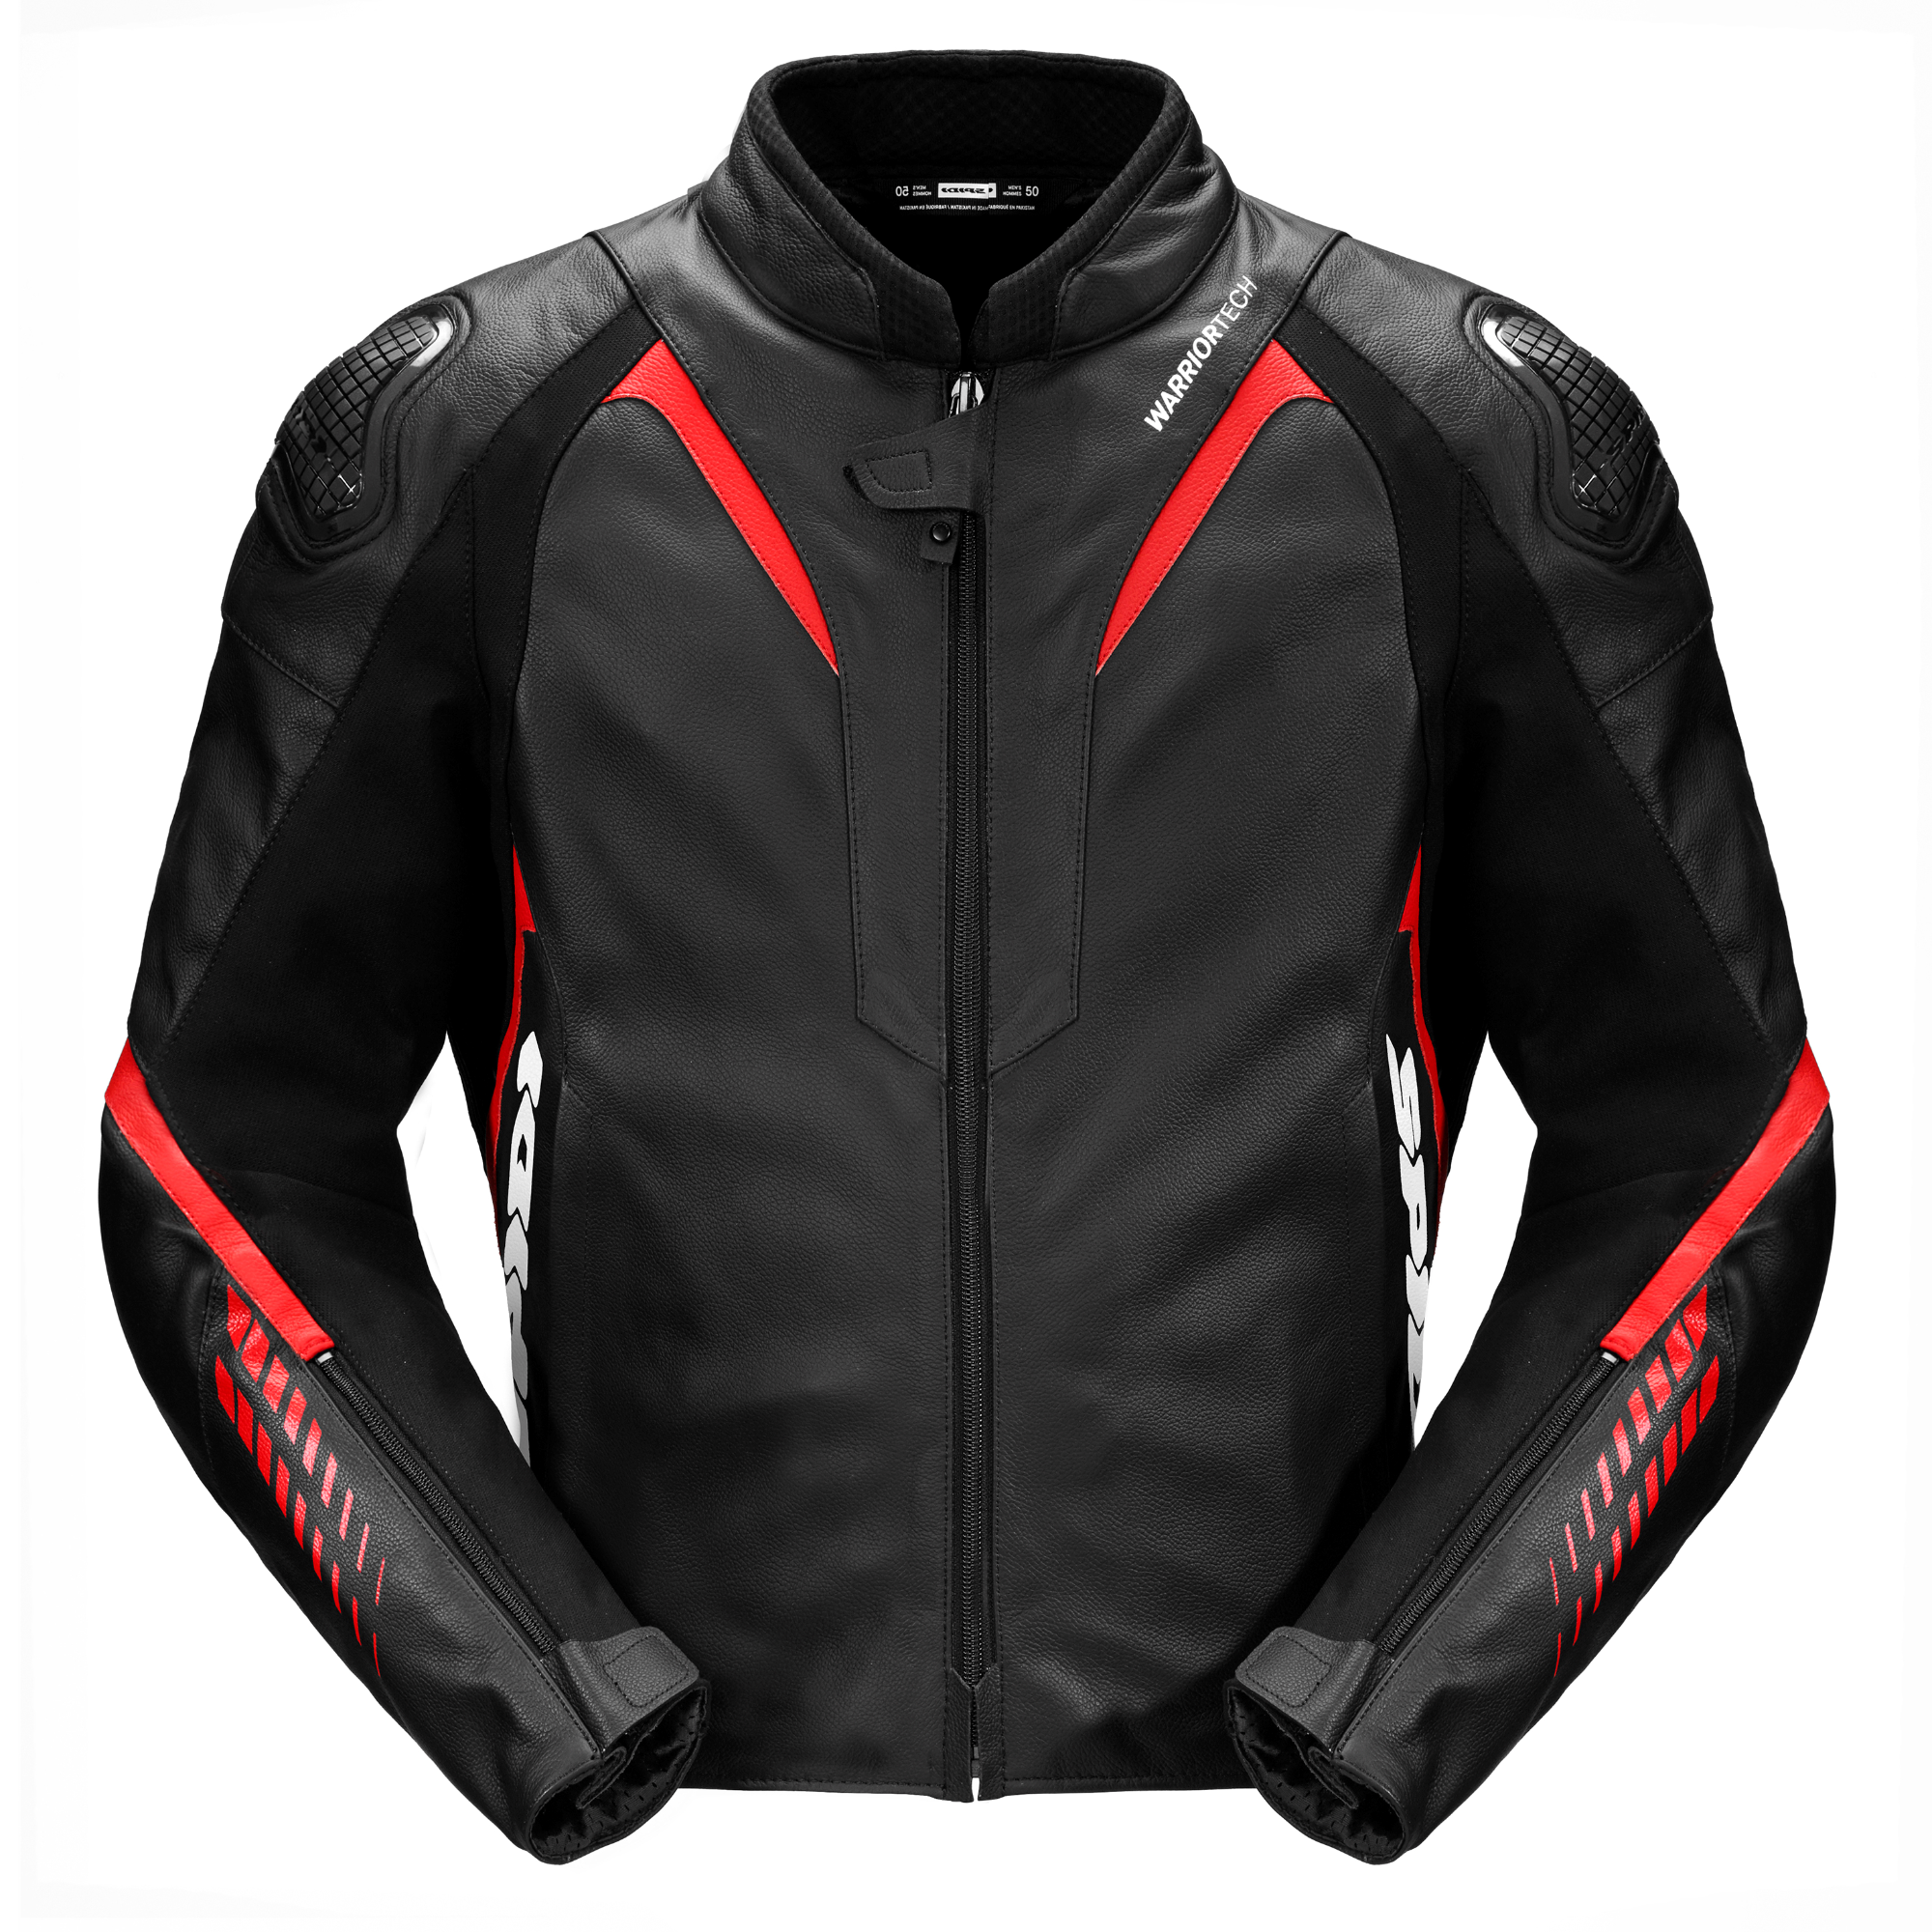 Image of Spidi Nkd-1 Jacket Red Size 56 ID 8030161461794